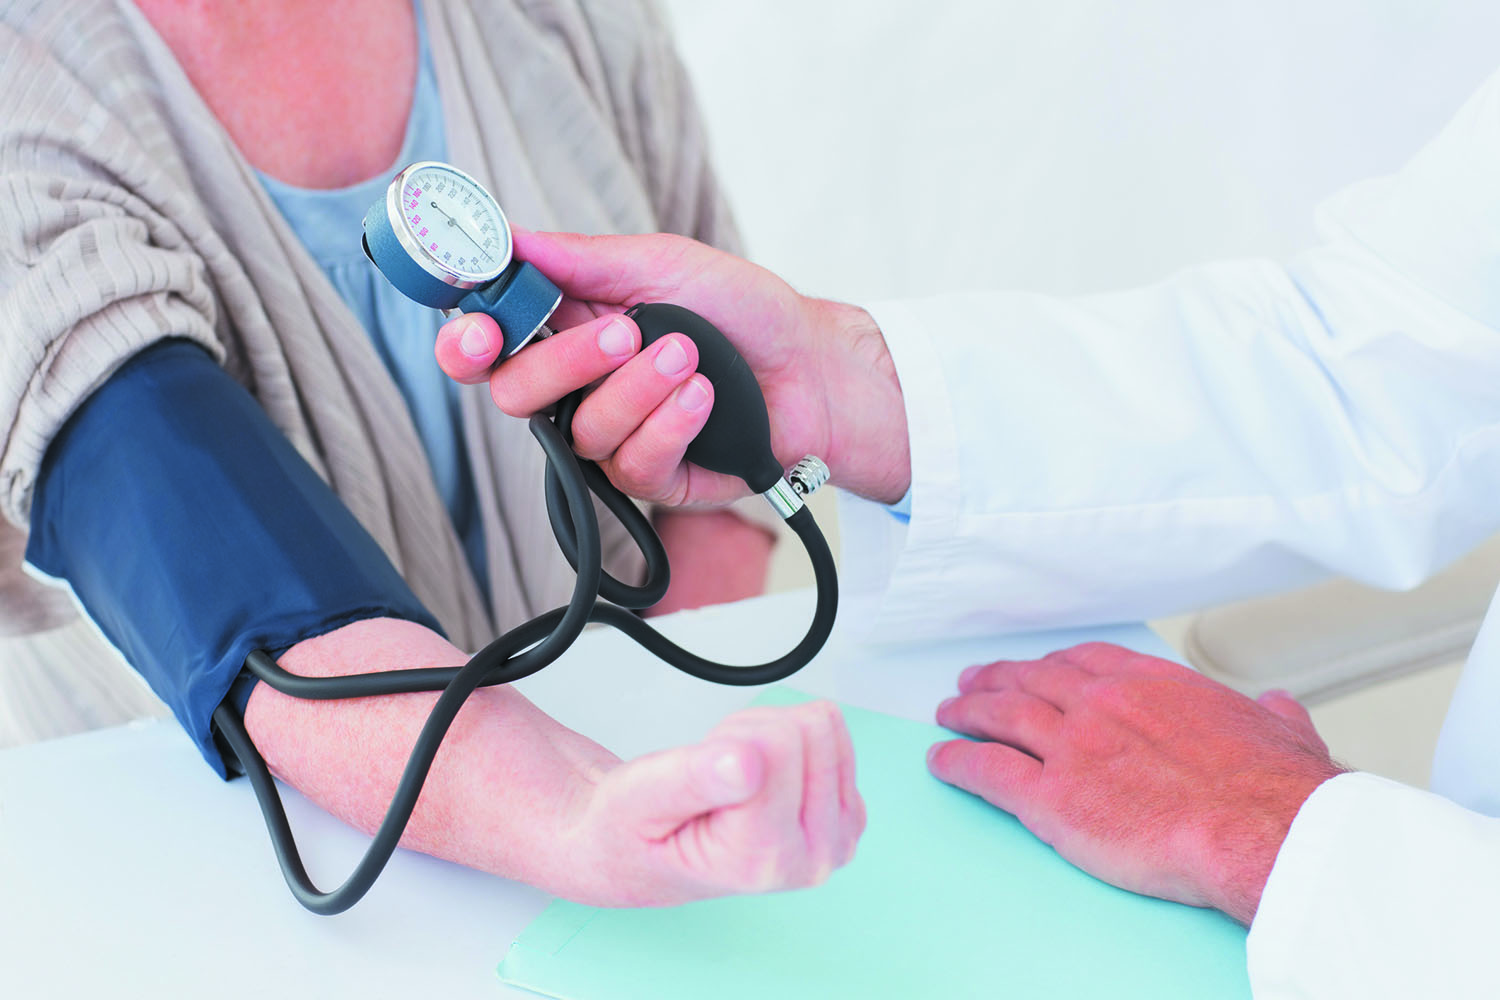 Can your blood pressure be too low?